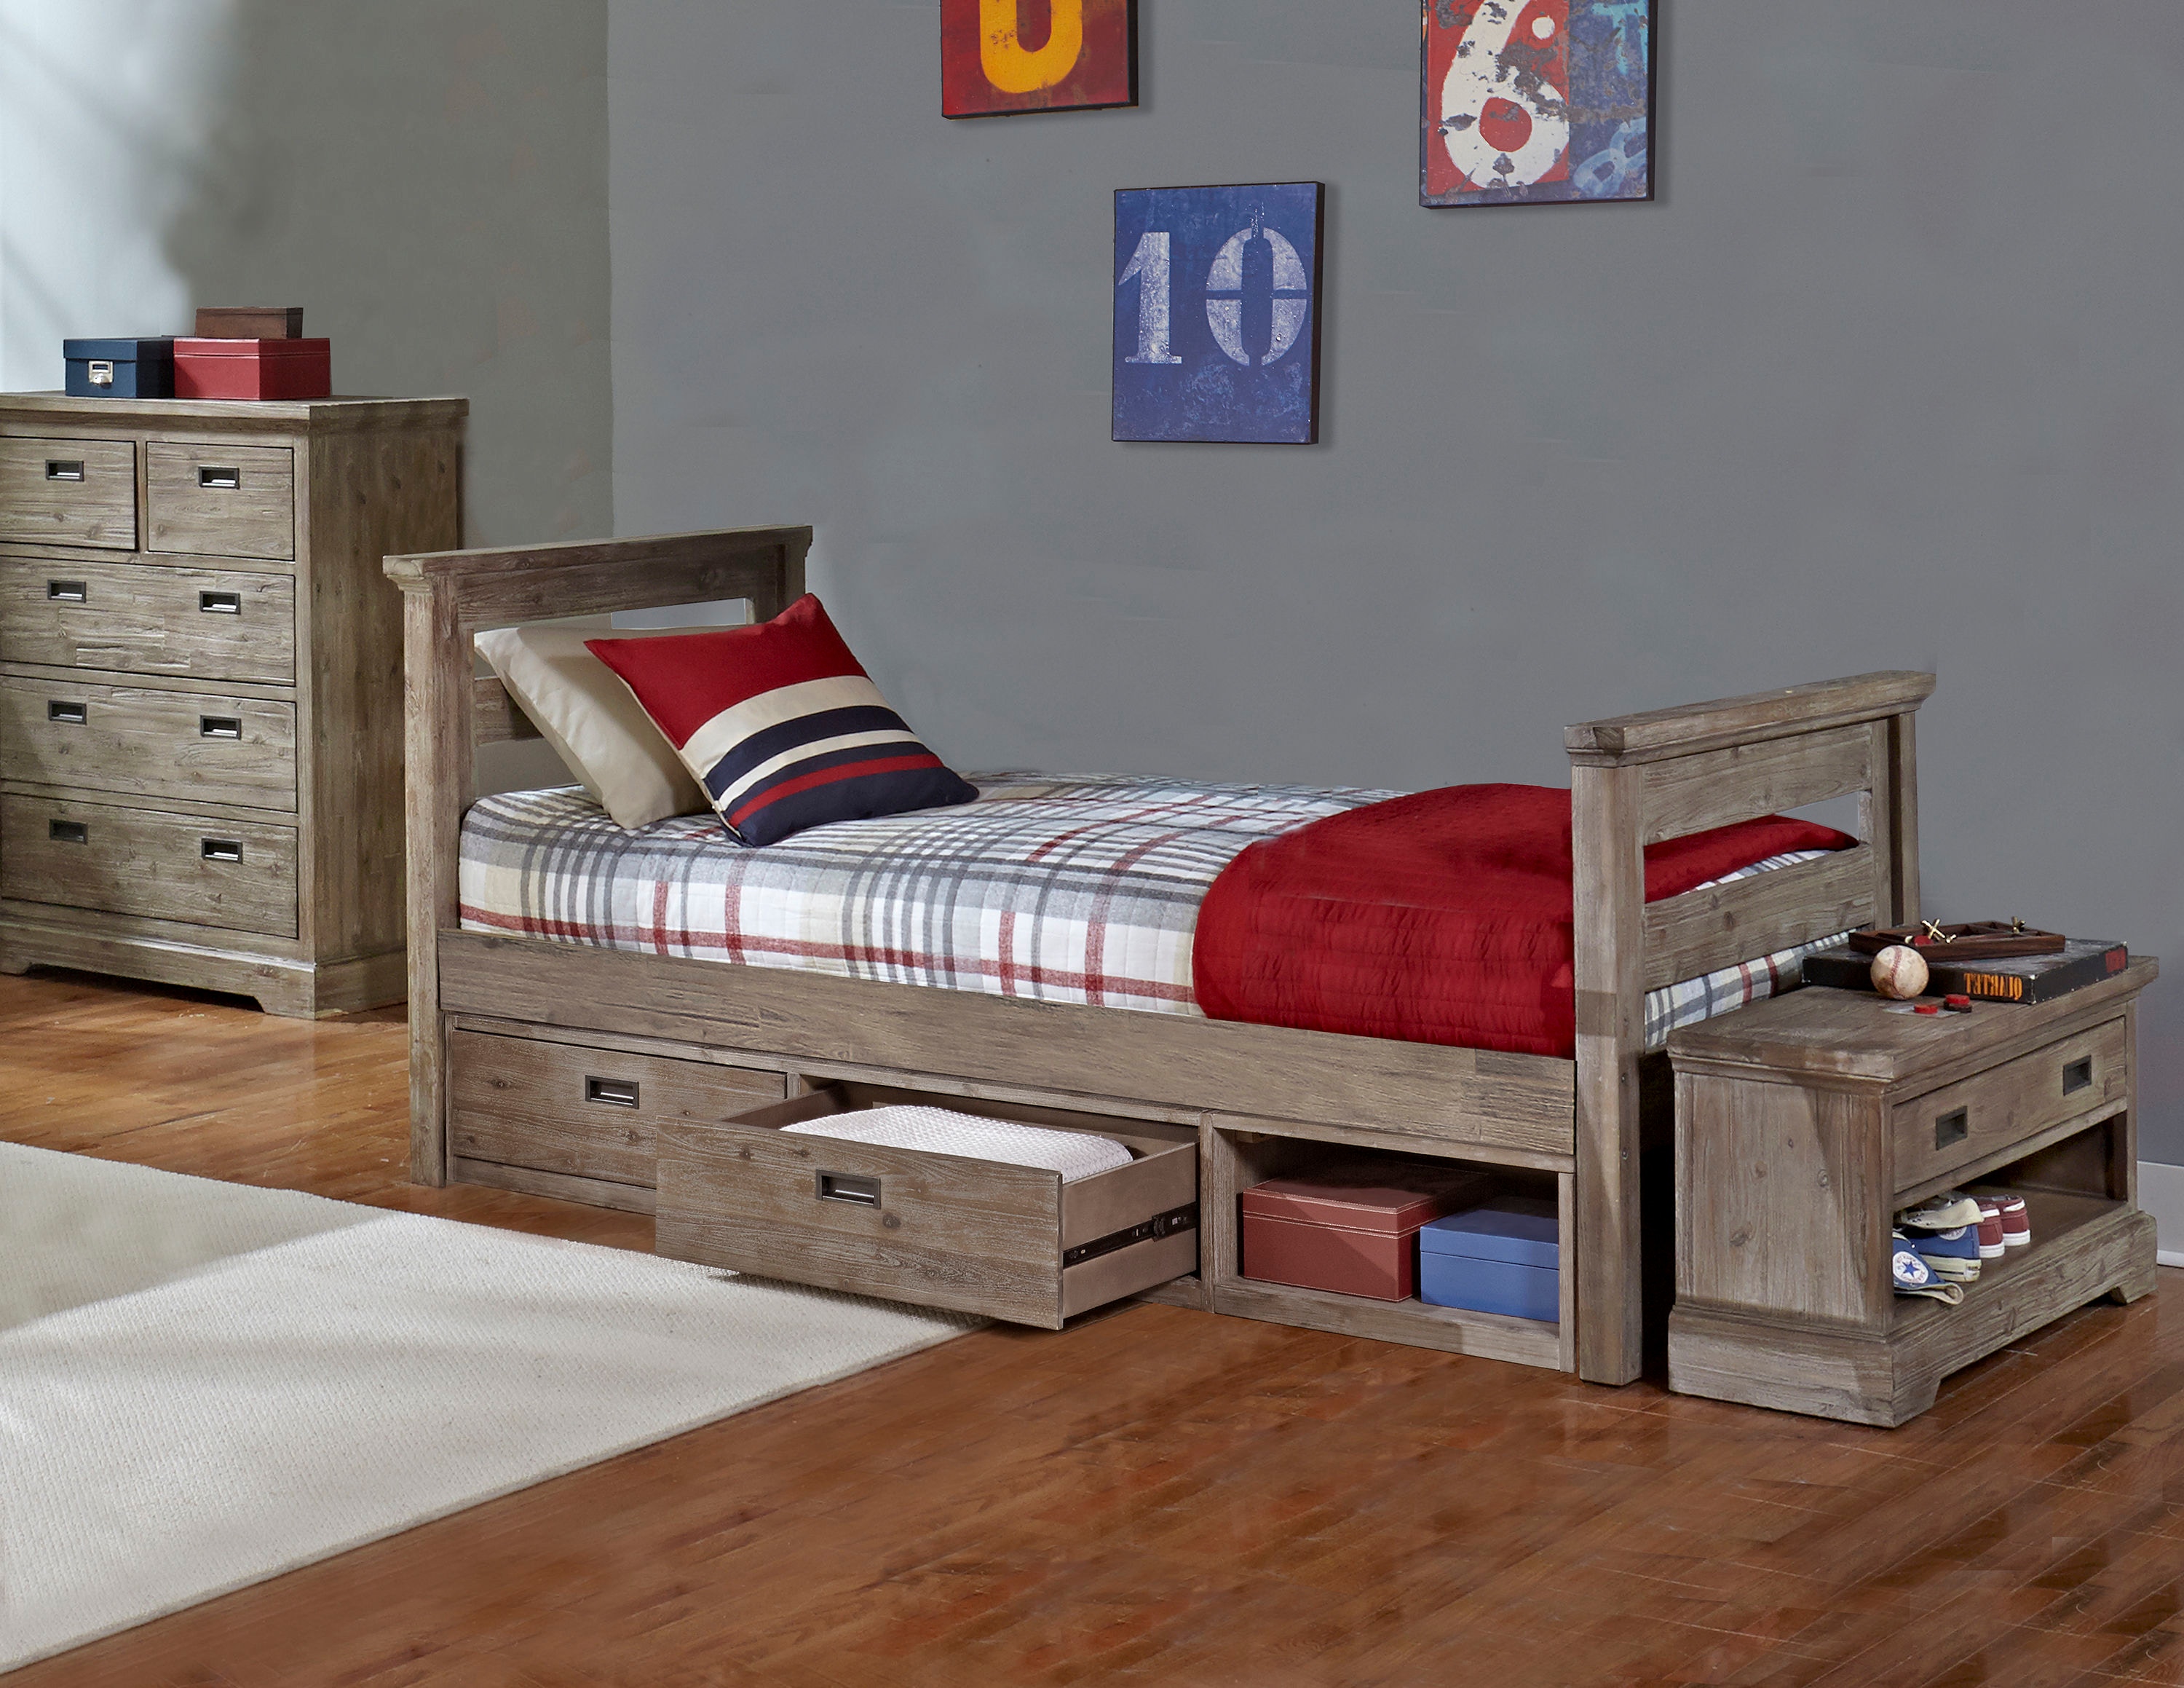 kids twin bed frame with storage